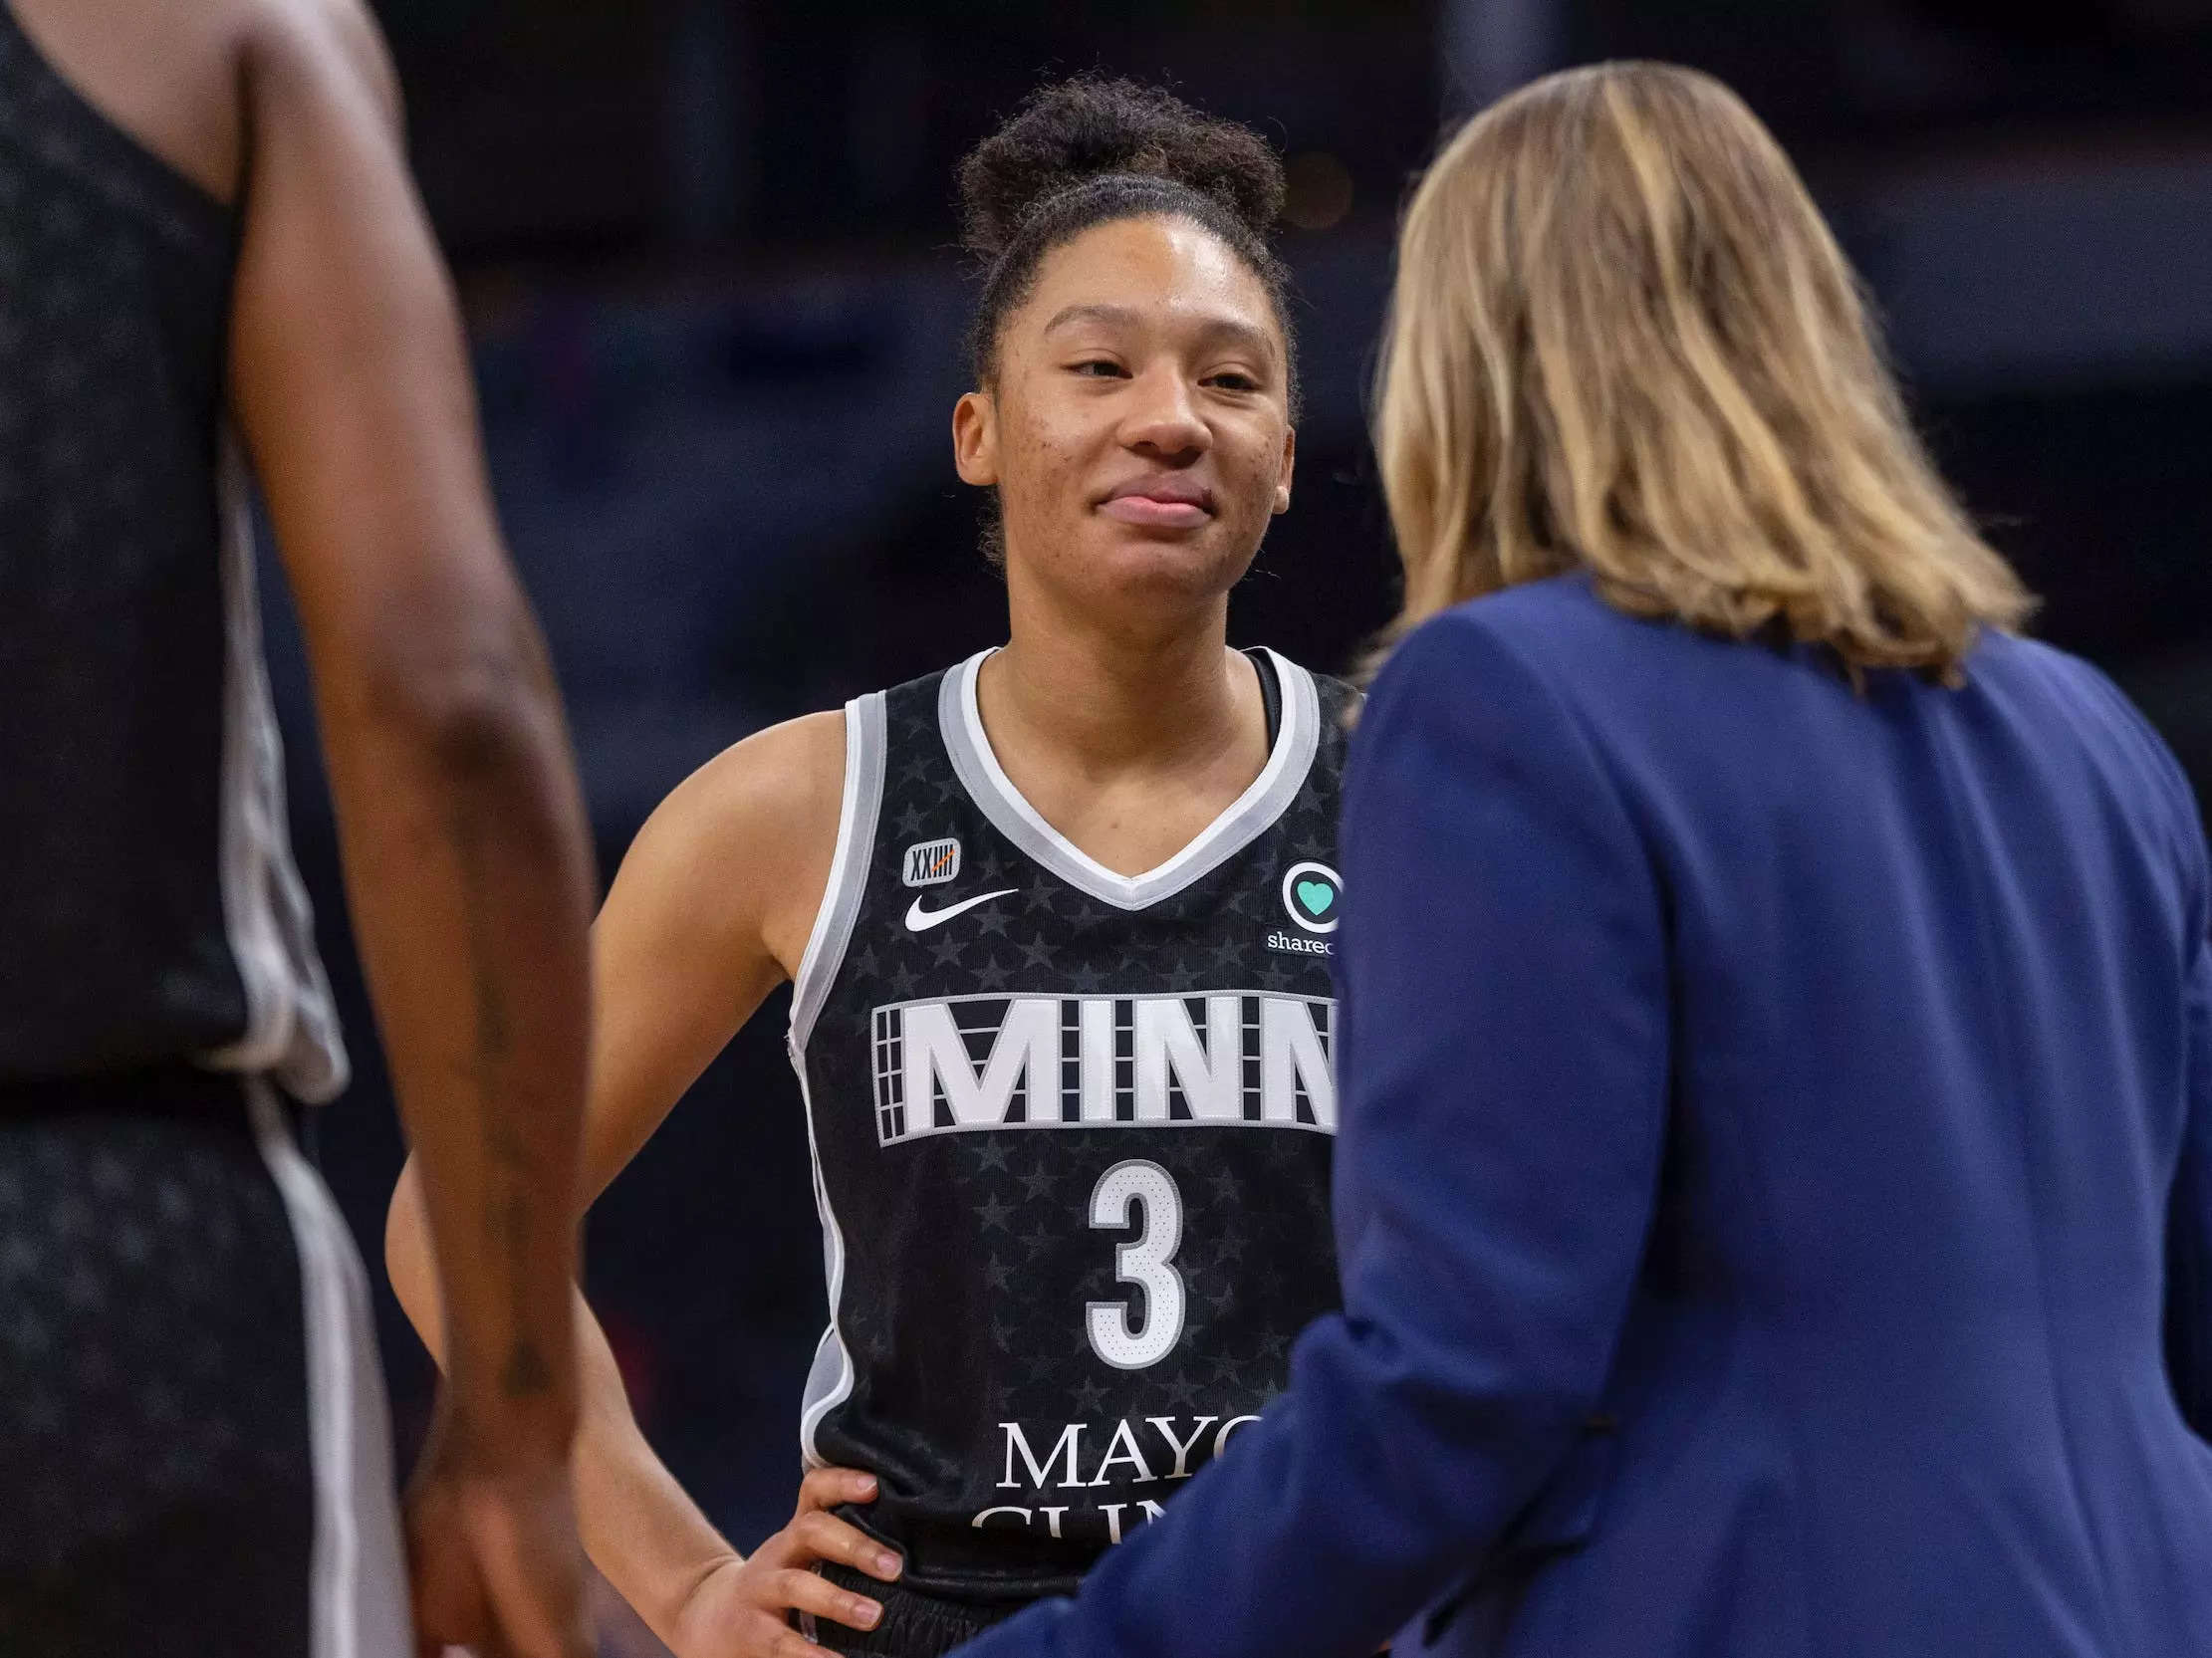 A WNBA star went viral for schooling men who 'don't respect women's basketball' in off-season pickup games